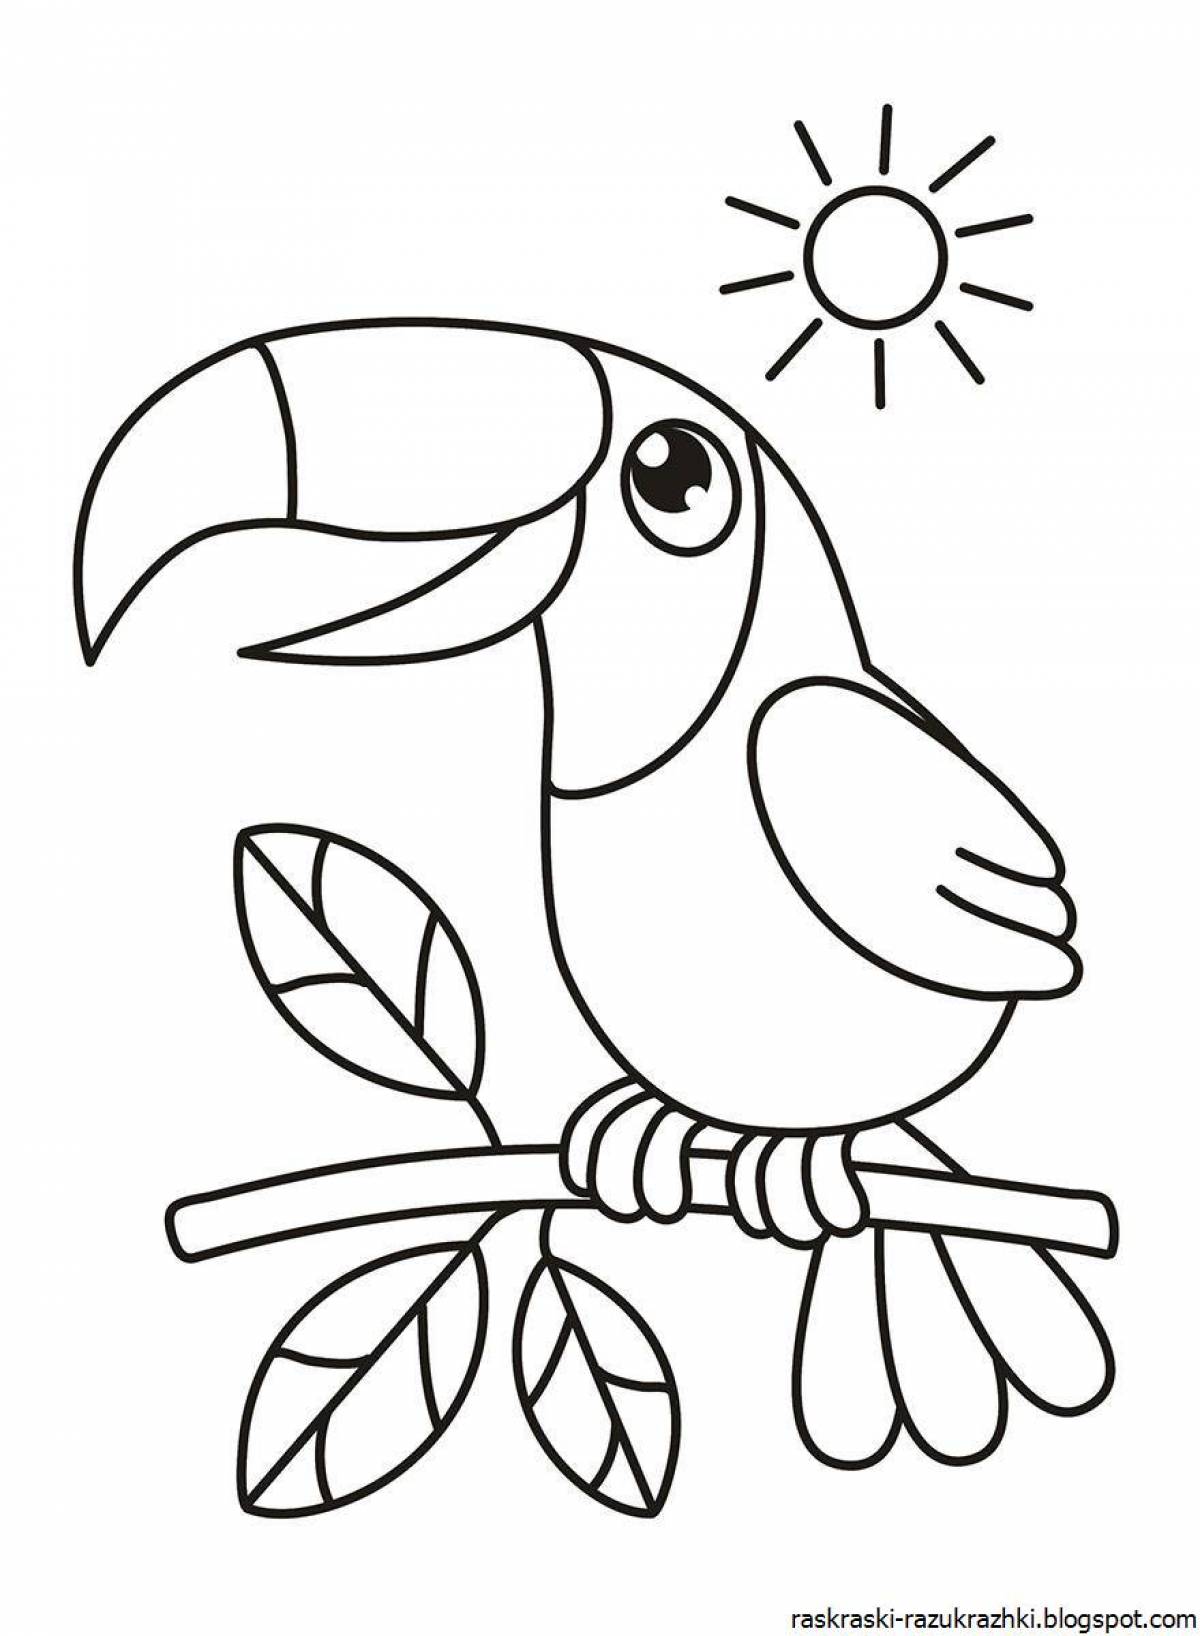 Grand bird coloring book for children 3-4 years old